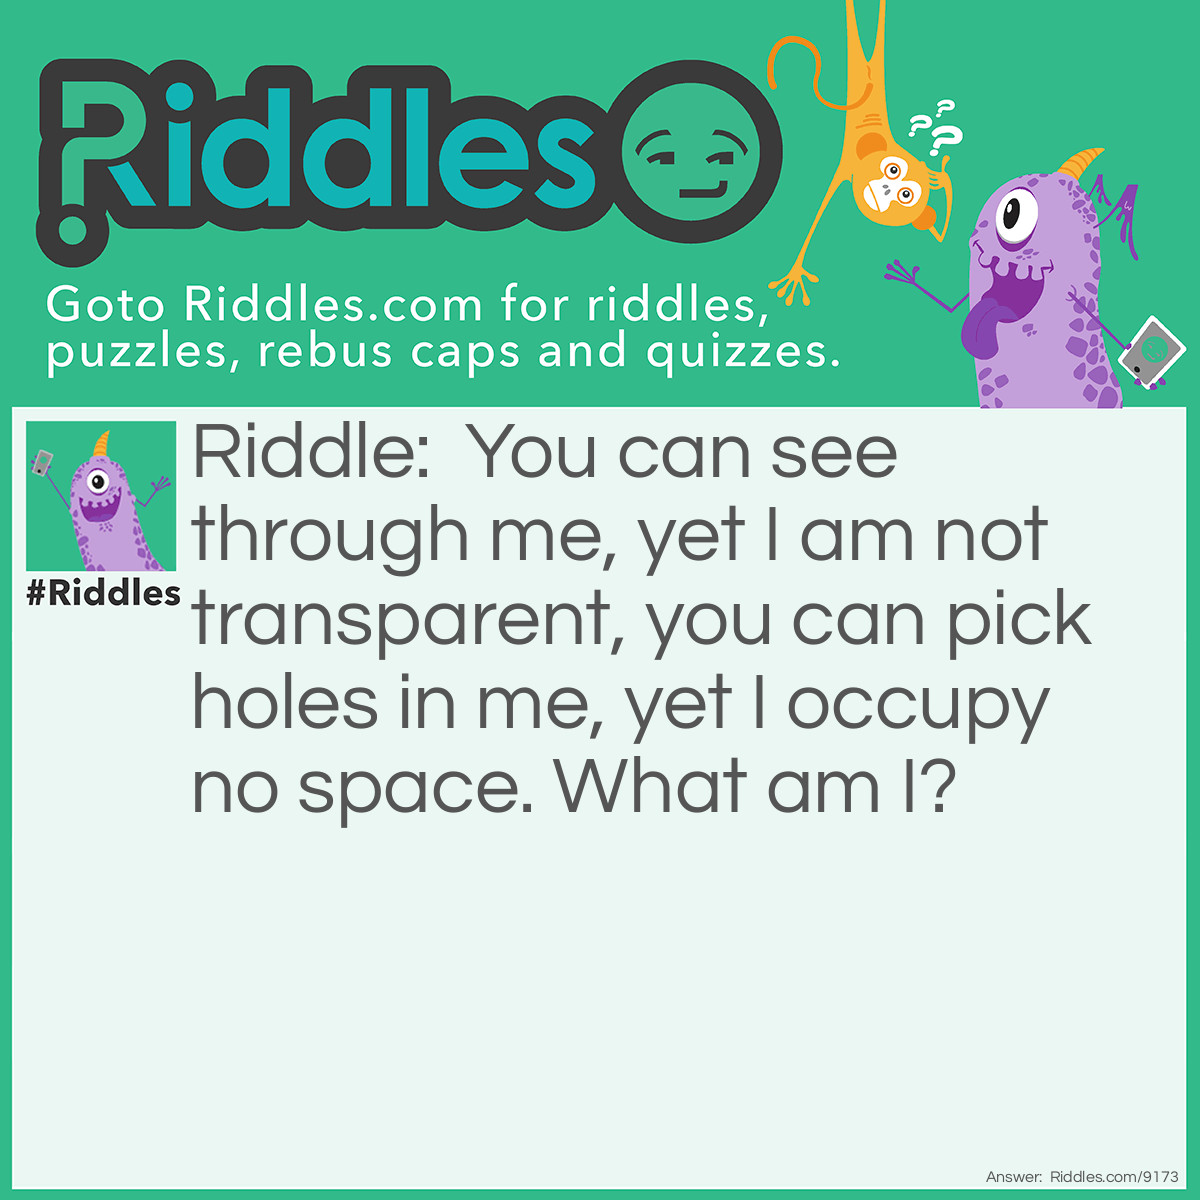 Riddle: You can see through me, yet I am not transparent, you can pick holes in me, yet I occupy no space. What am I? Answer: A lie.